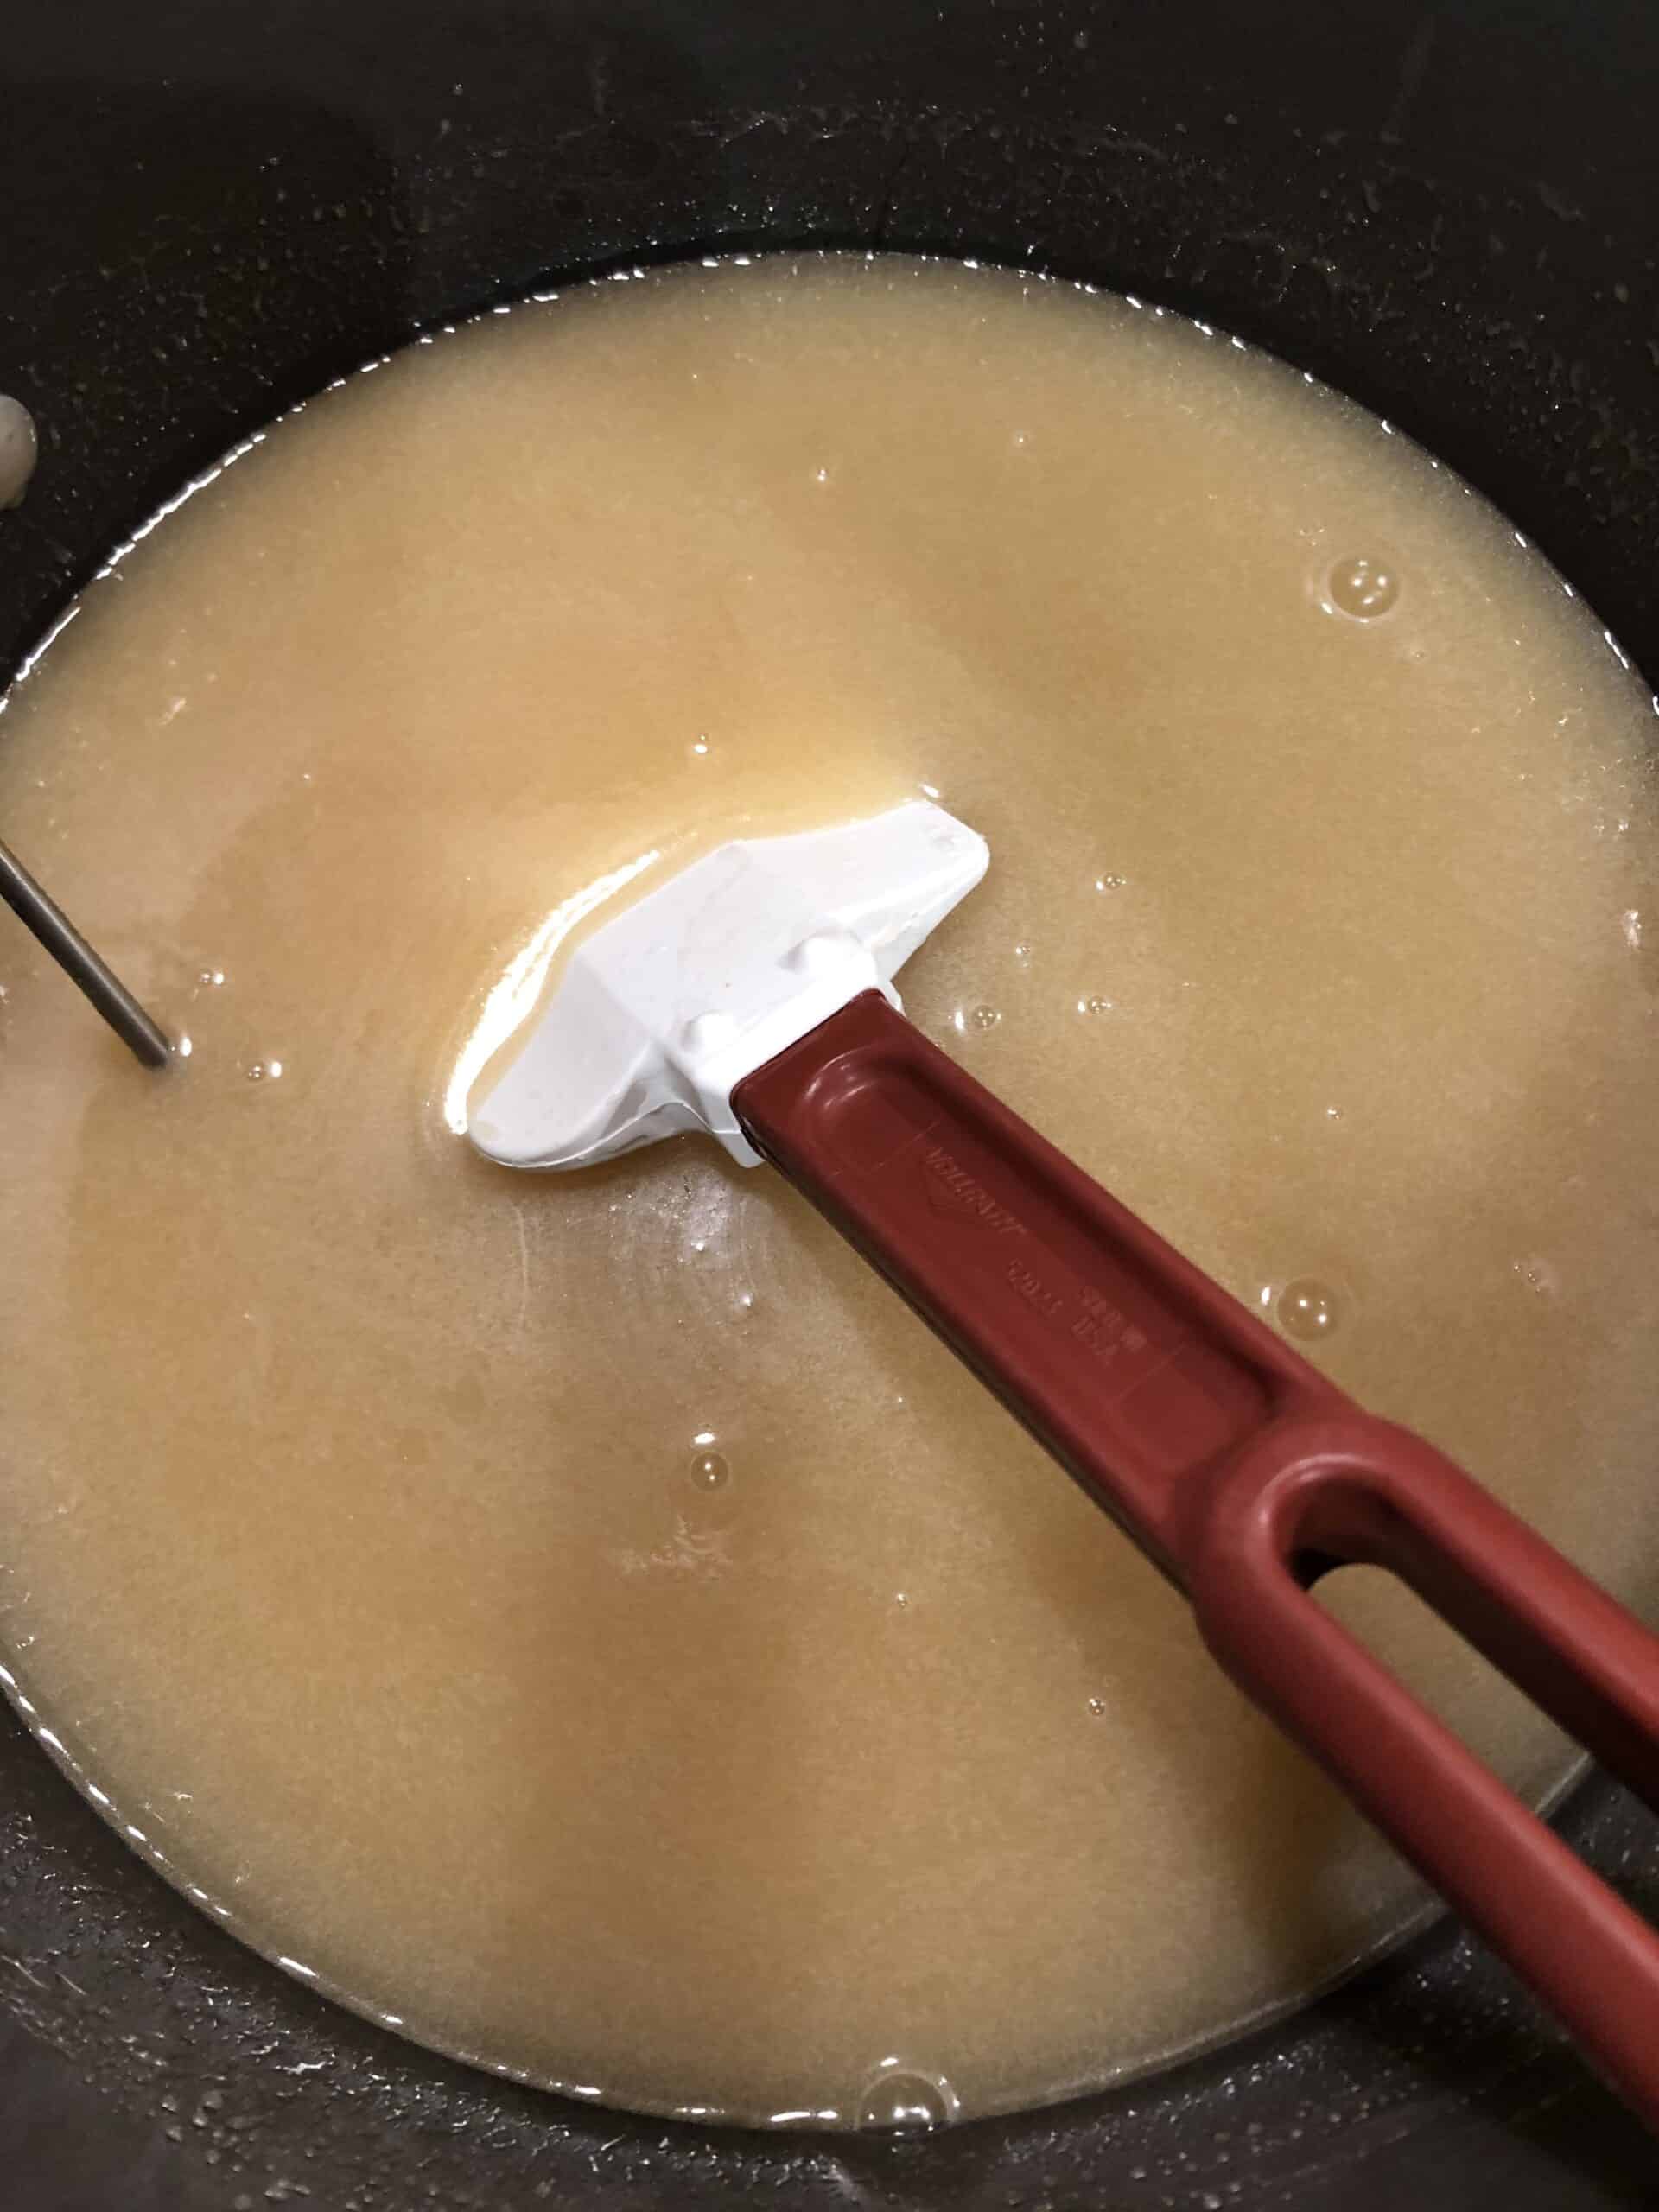 Combine half of the milk mixture, sugars, lt. corn syrup and salt in a large saucepan.